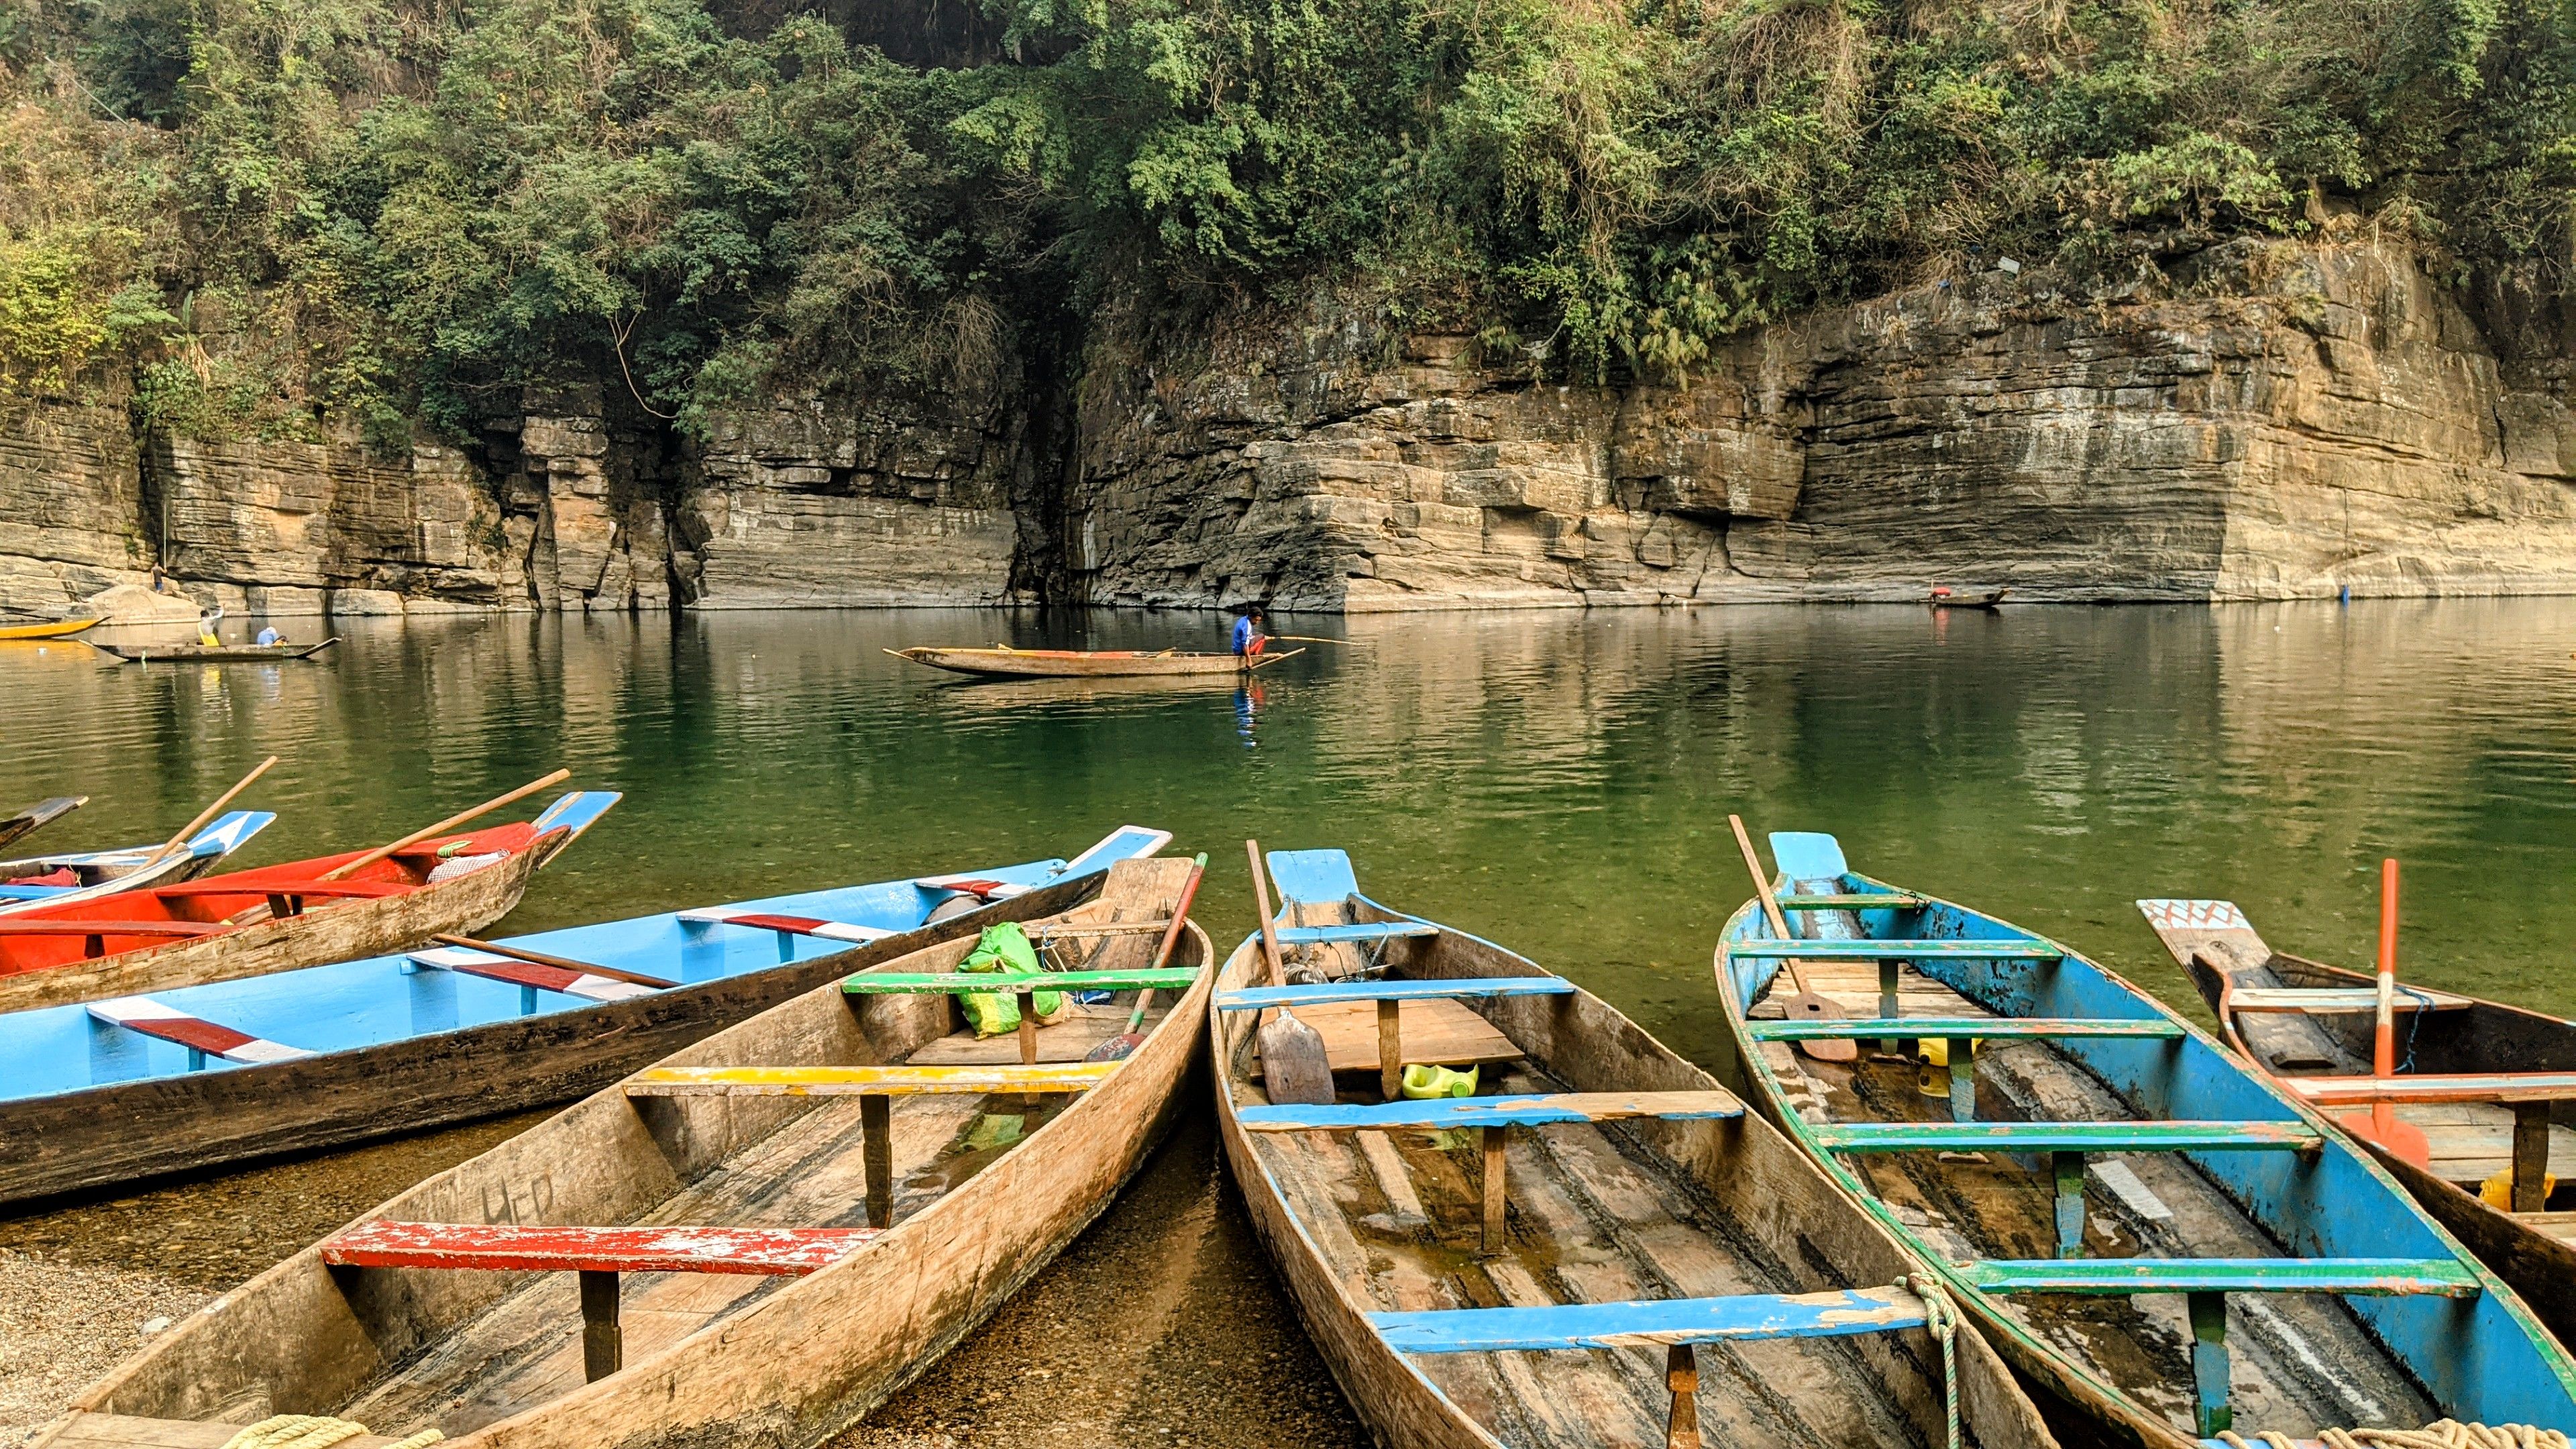 Travel Articles | Travel Blogs | Travel News & Information | Travel Guide |  India.comThe Stunning Dawki River in Meghalaya Is Going Viral For Its  Crystal Clear Water | See Pictures